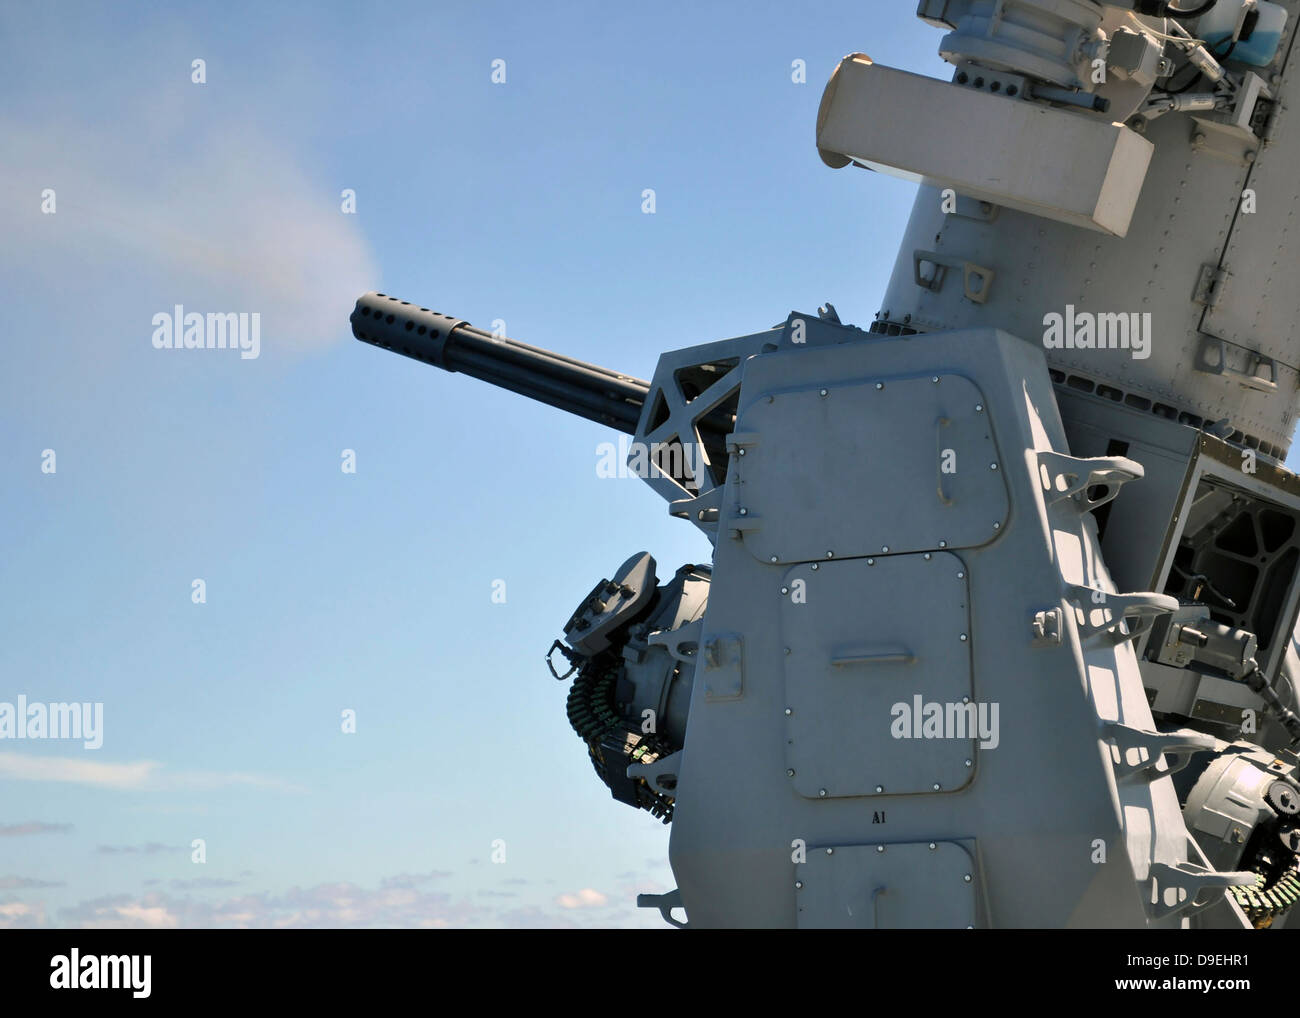 Die Phalanx Close-in Weapon System. Stockfoto